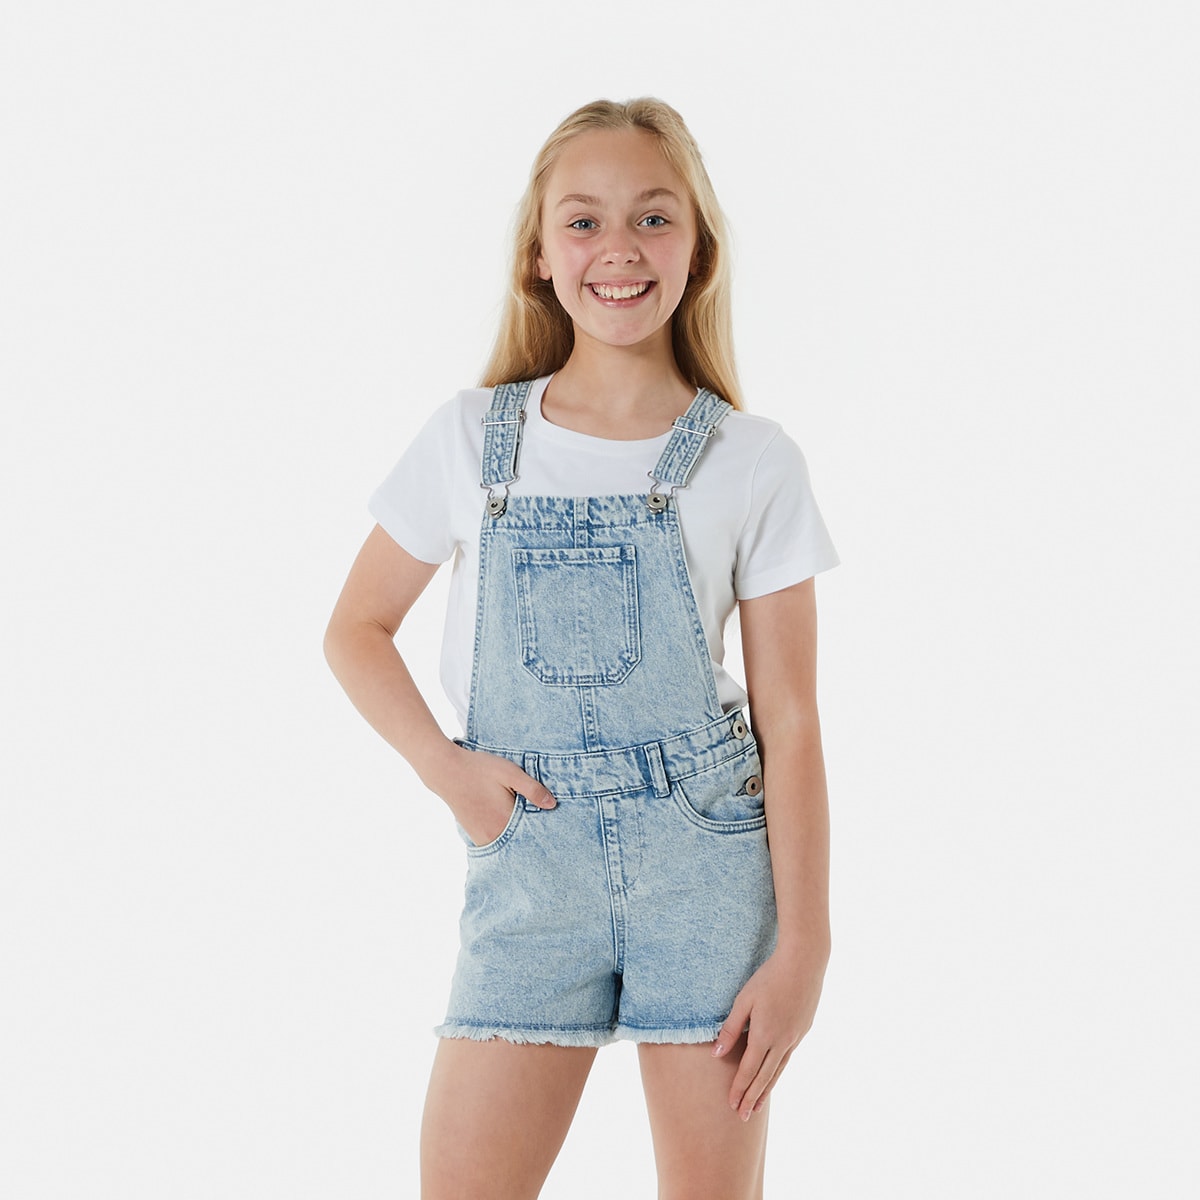 Mum defends daughters Kmart overalls amid outrage